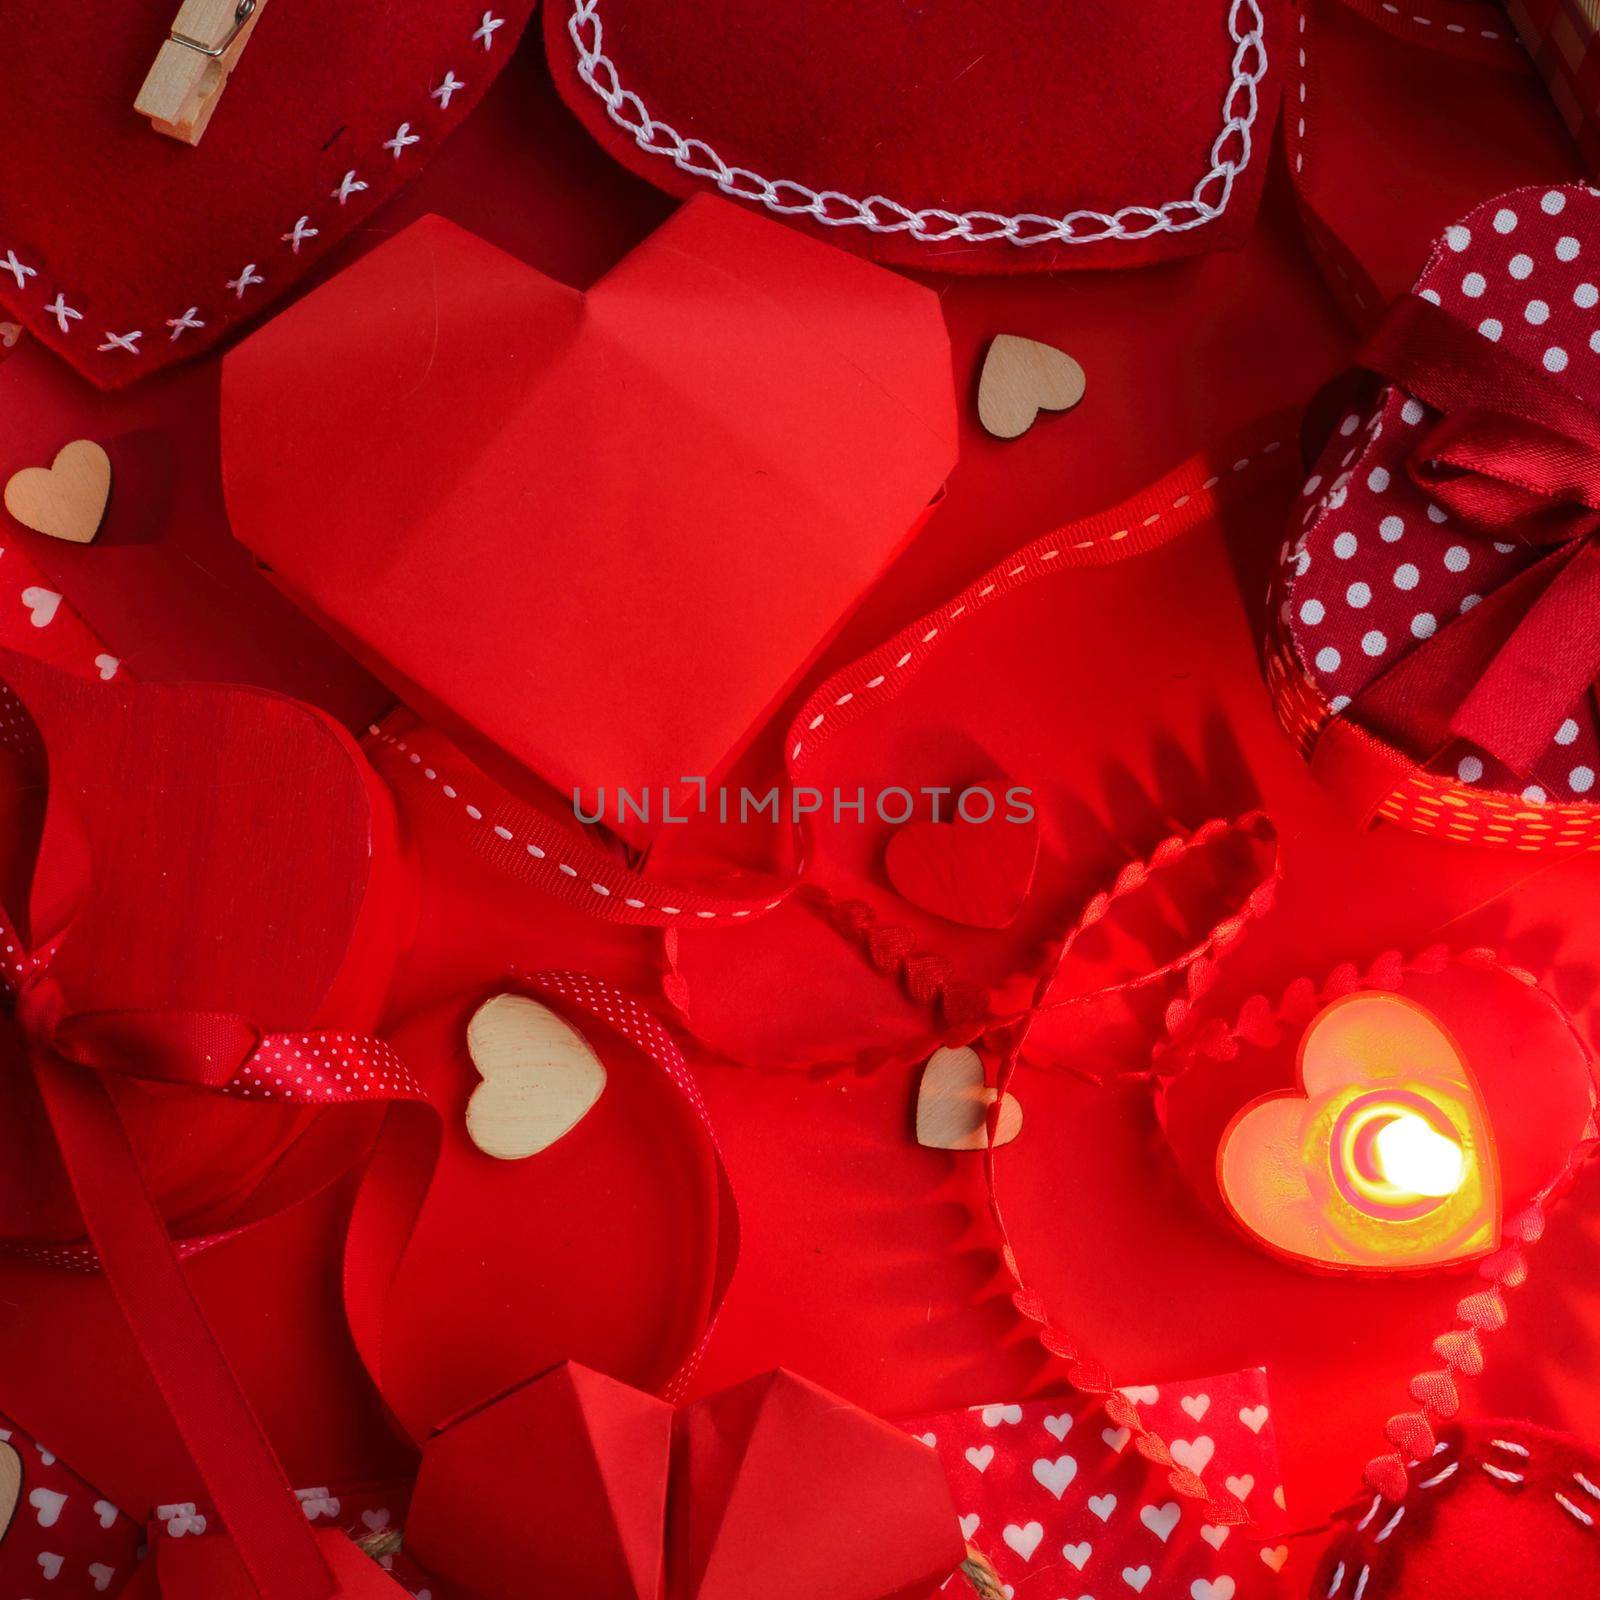 Many valentine day hearts and decor, homemade craft concept, red fabric, paper, gifts and candles